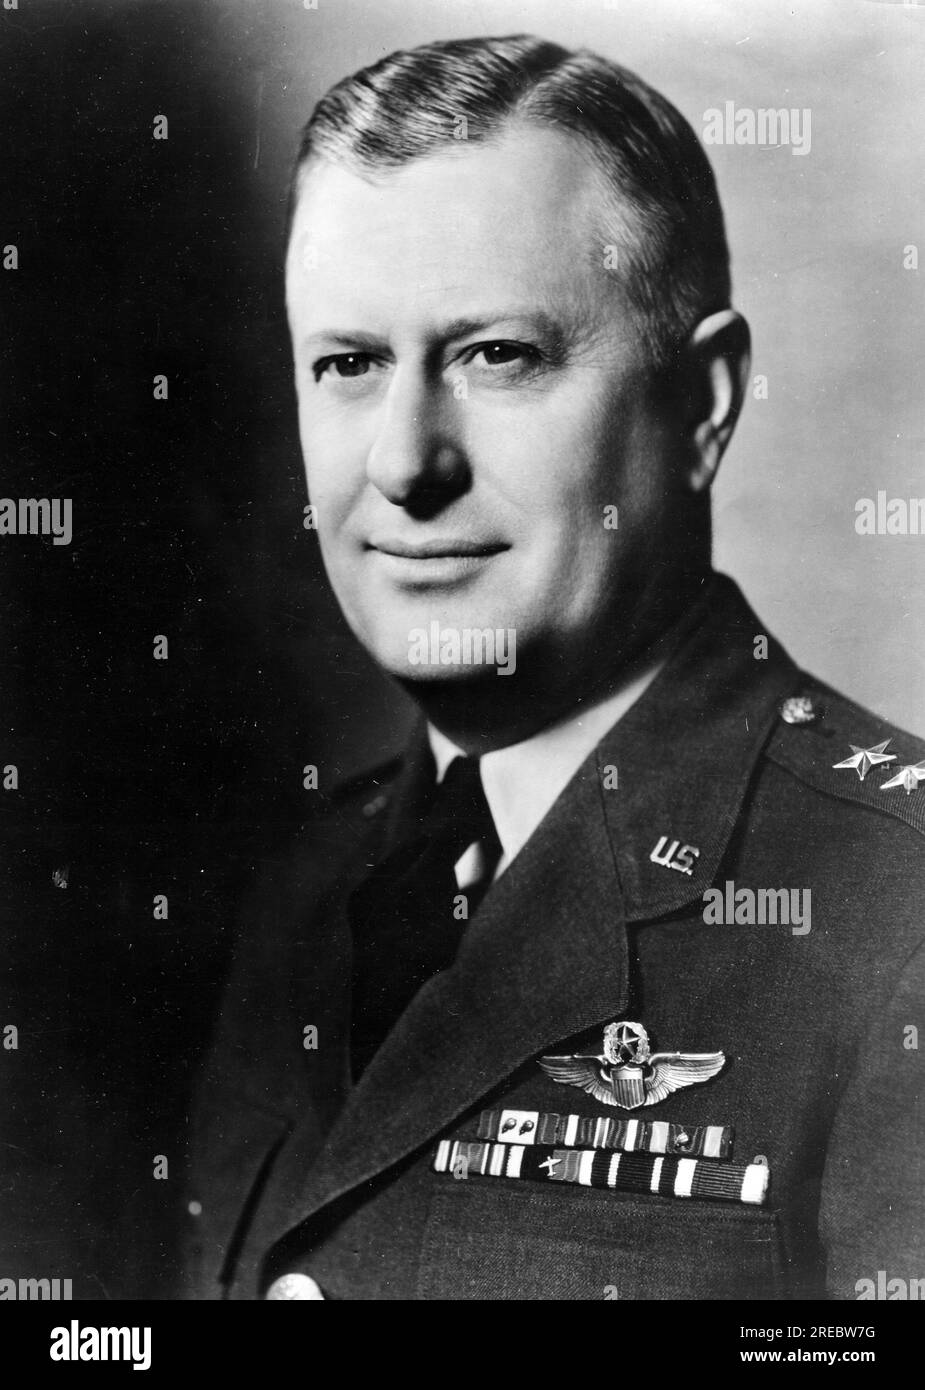 Tunner, William Henry, 14.7.1906 - 6,4.1983, American General, INFORMATION-AUTORISATION-DROITS-SUPPLÉMENTAIRES-NON-DISPONIBLE Banque D'Images